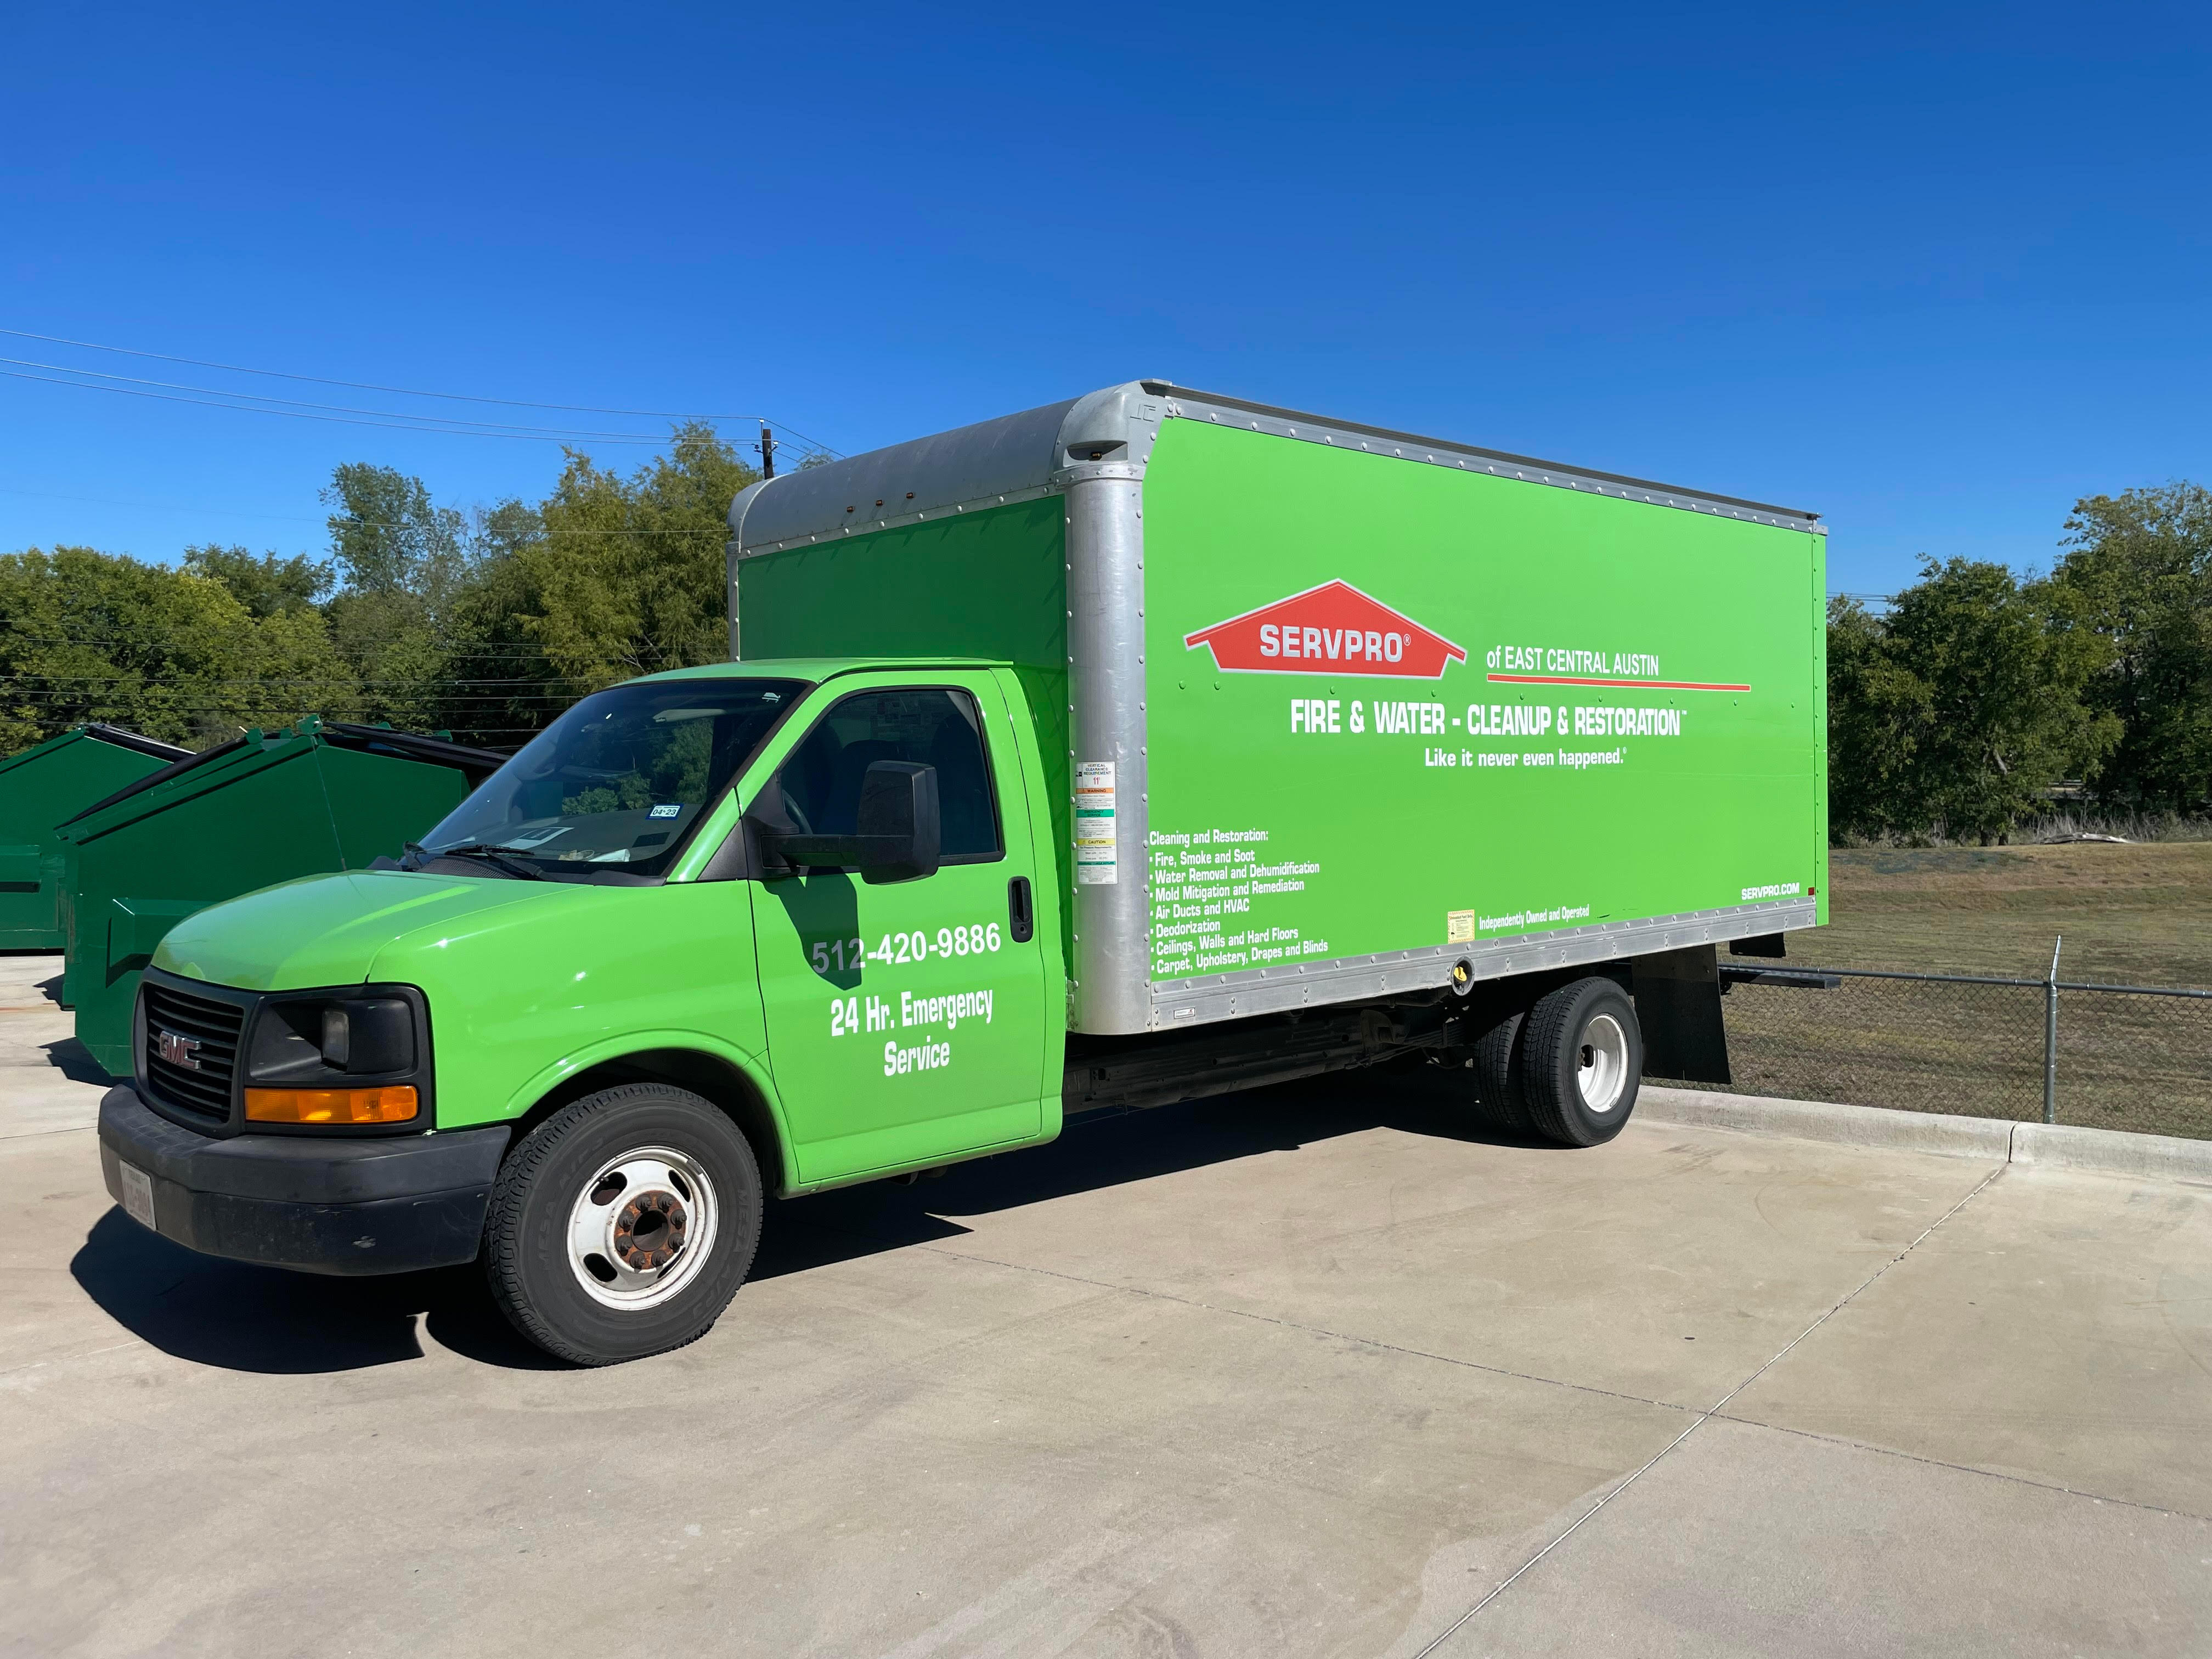 A SERVPRO® emergency response vehicle parked outside of the storefront.